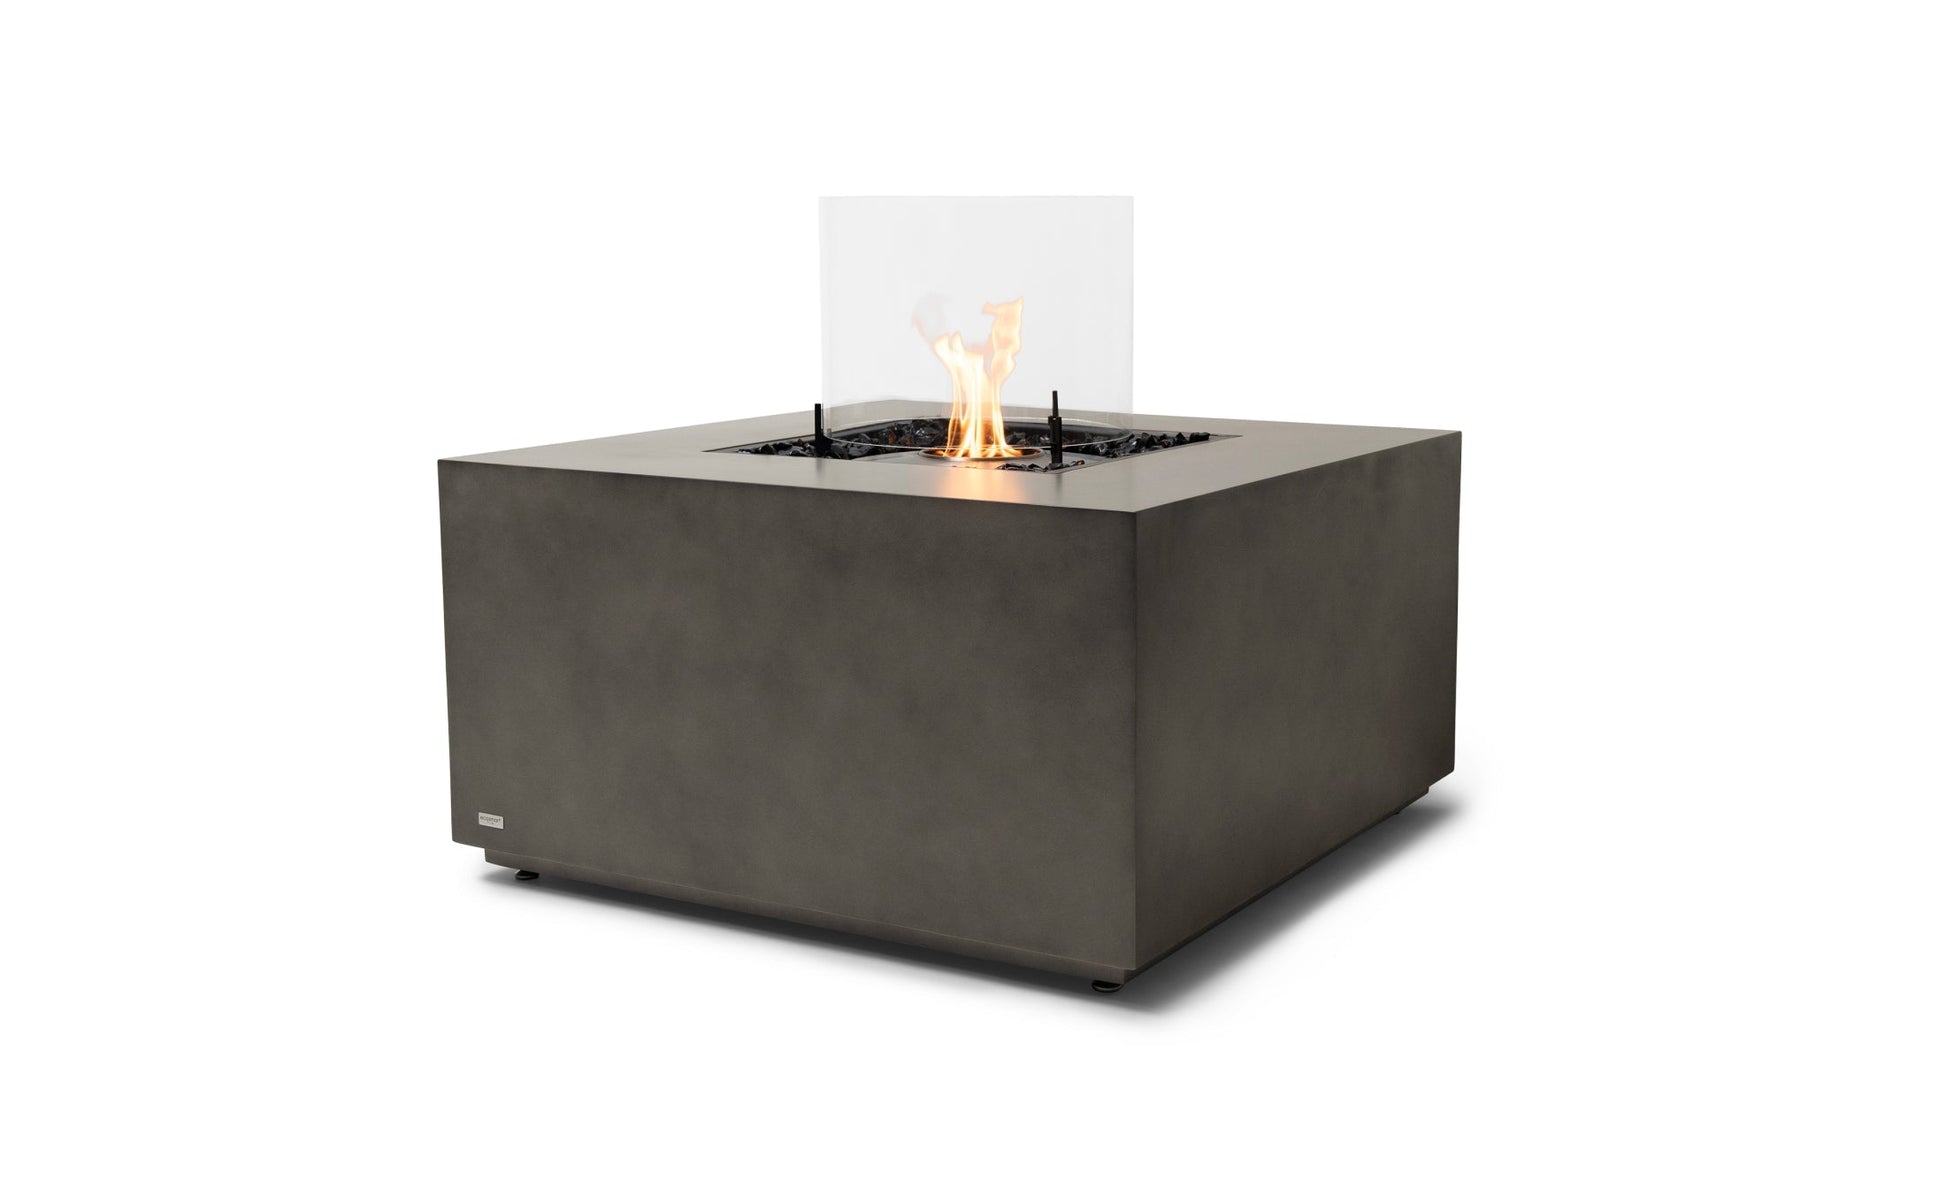 EcoSmart Fire CHASER 38" Natural Indoor Fire Pit Table with Stainless Steel Burner by Mad Design Group